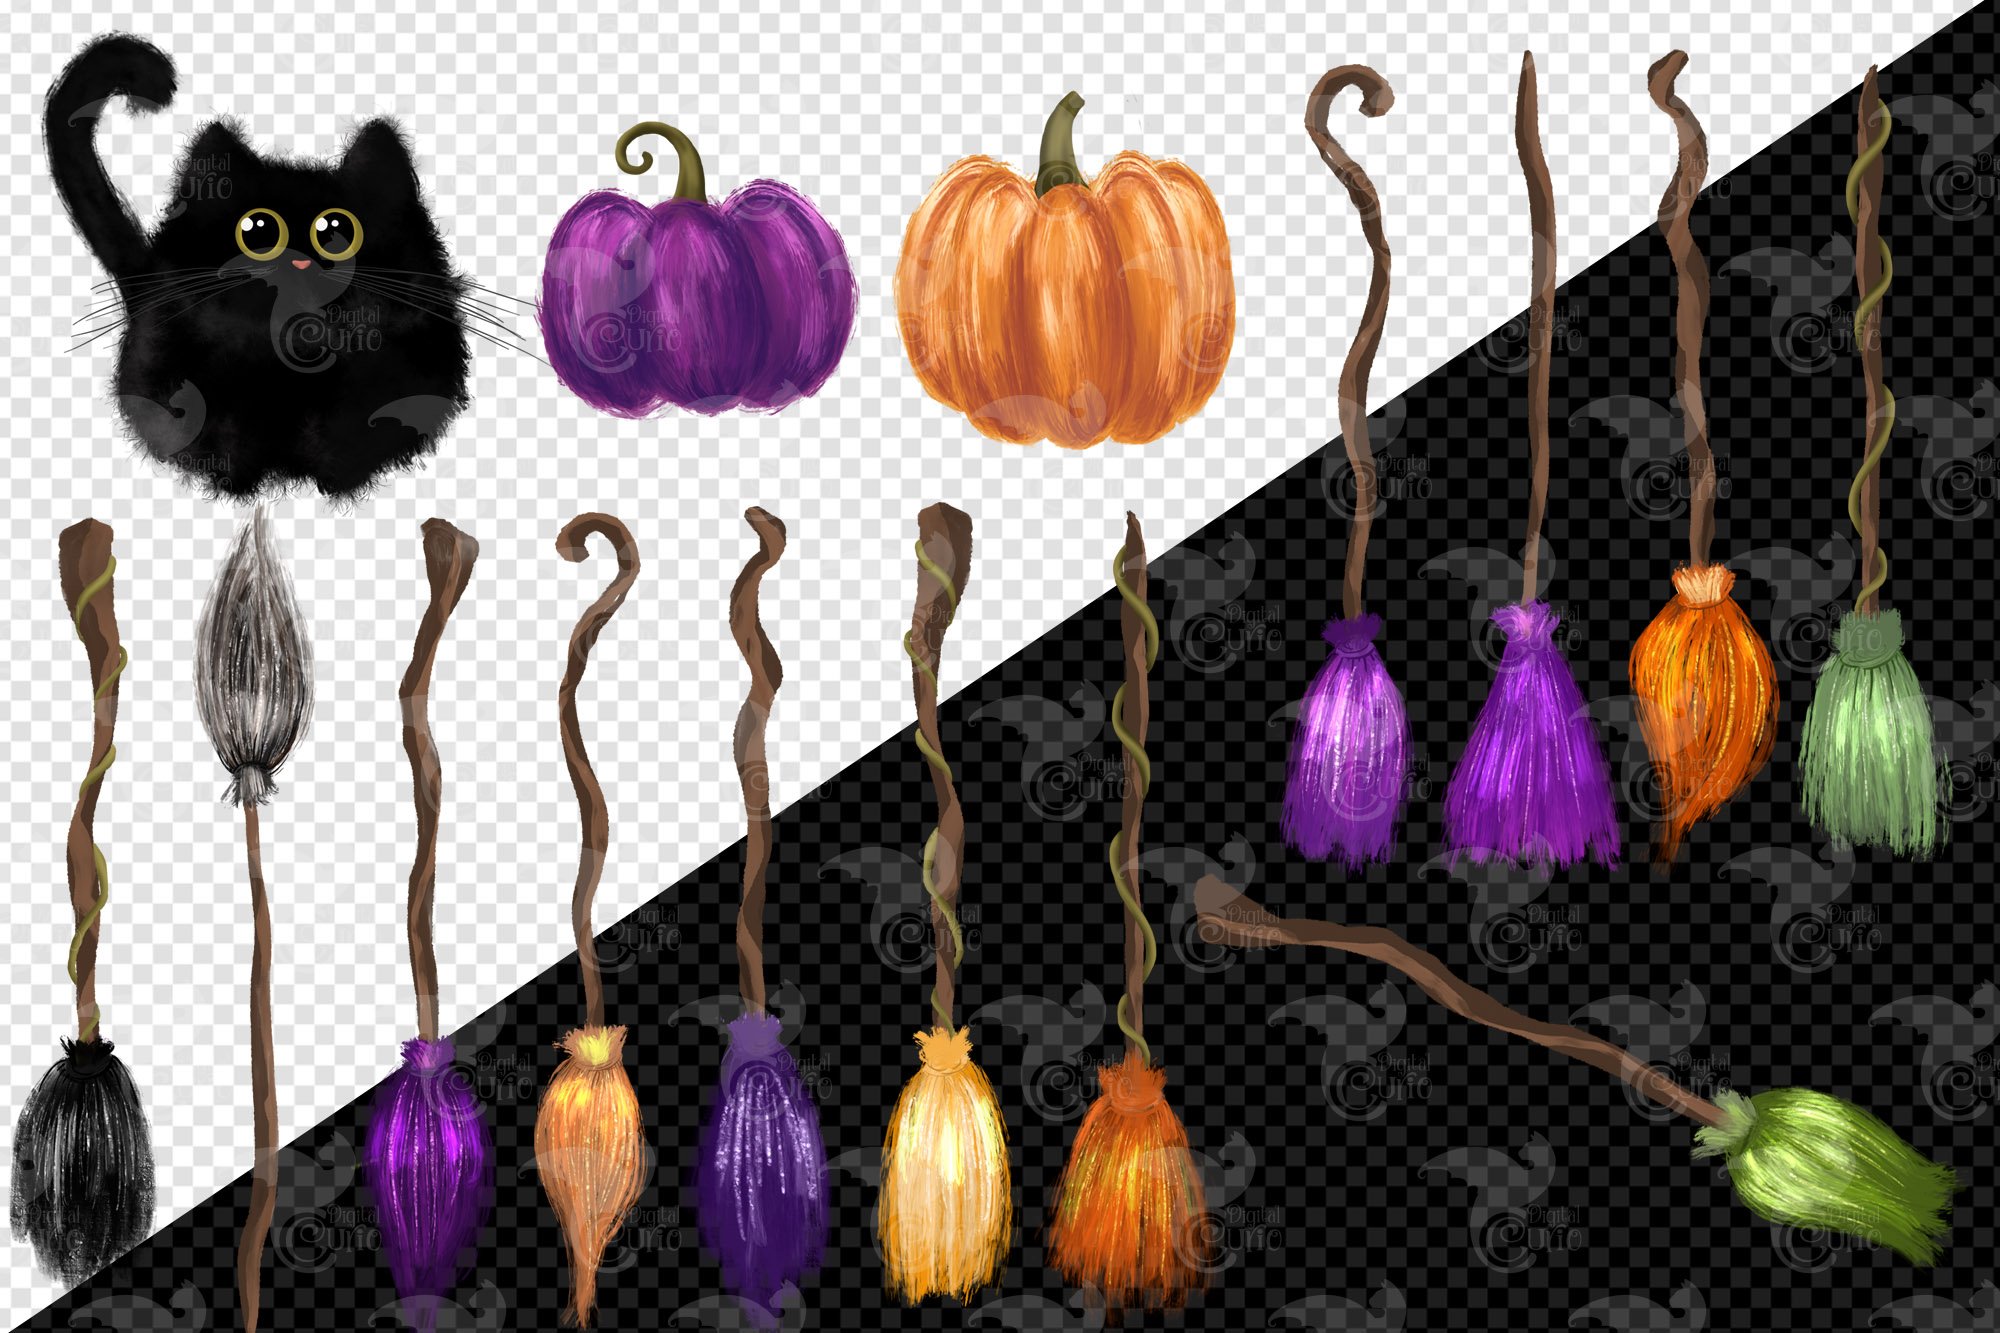 Broomstick Clipart preview image.